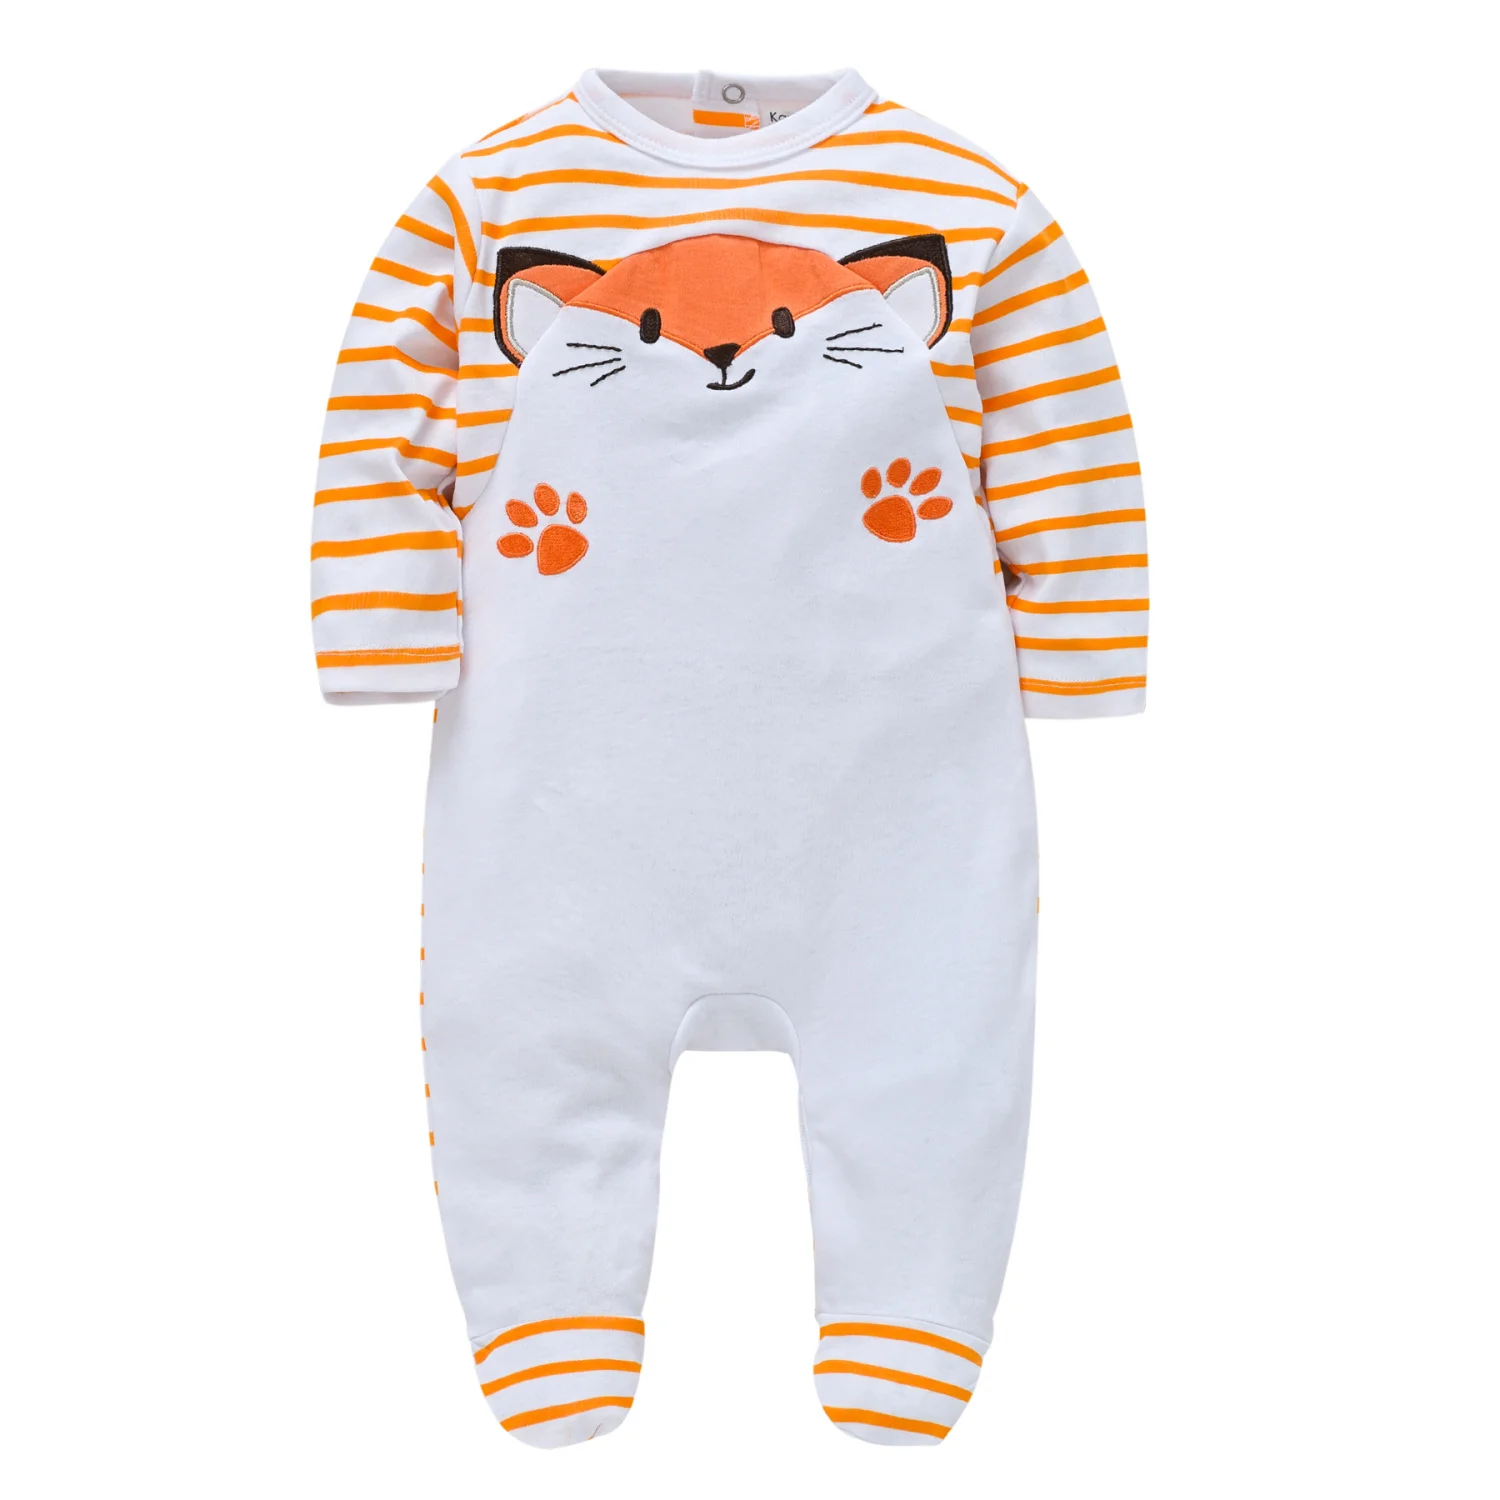 

Honeyzone Newborn Bodysuits One-Pieces Fox Print Baby Clothes 0 To 12 Months Bebe Jumpsuits Naipe Overall Infant Costume Pelele